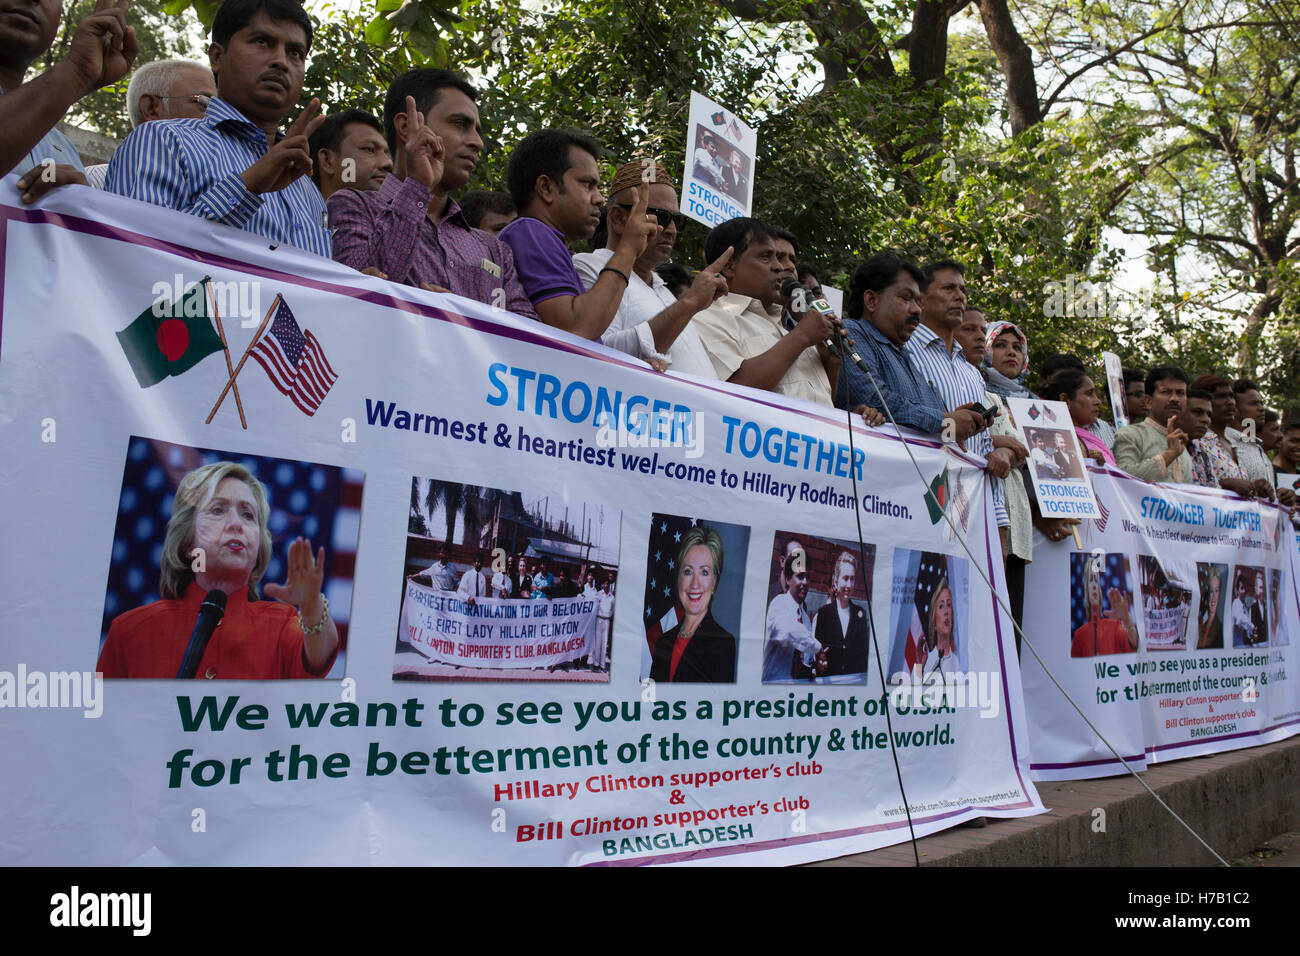 Dhaka, Bangladesh. 3rd Nov, 2016. A group of people made human chain to support of democratic US presidential candidate Hillary Clinton in front of press-club, Dhaka, Bangladesh, on November 03, 2016. Credit:  zakir hossain chowdhury zakir/Alamy Live News Stock Photo